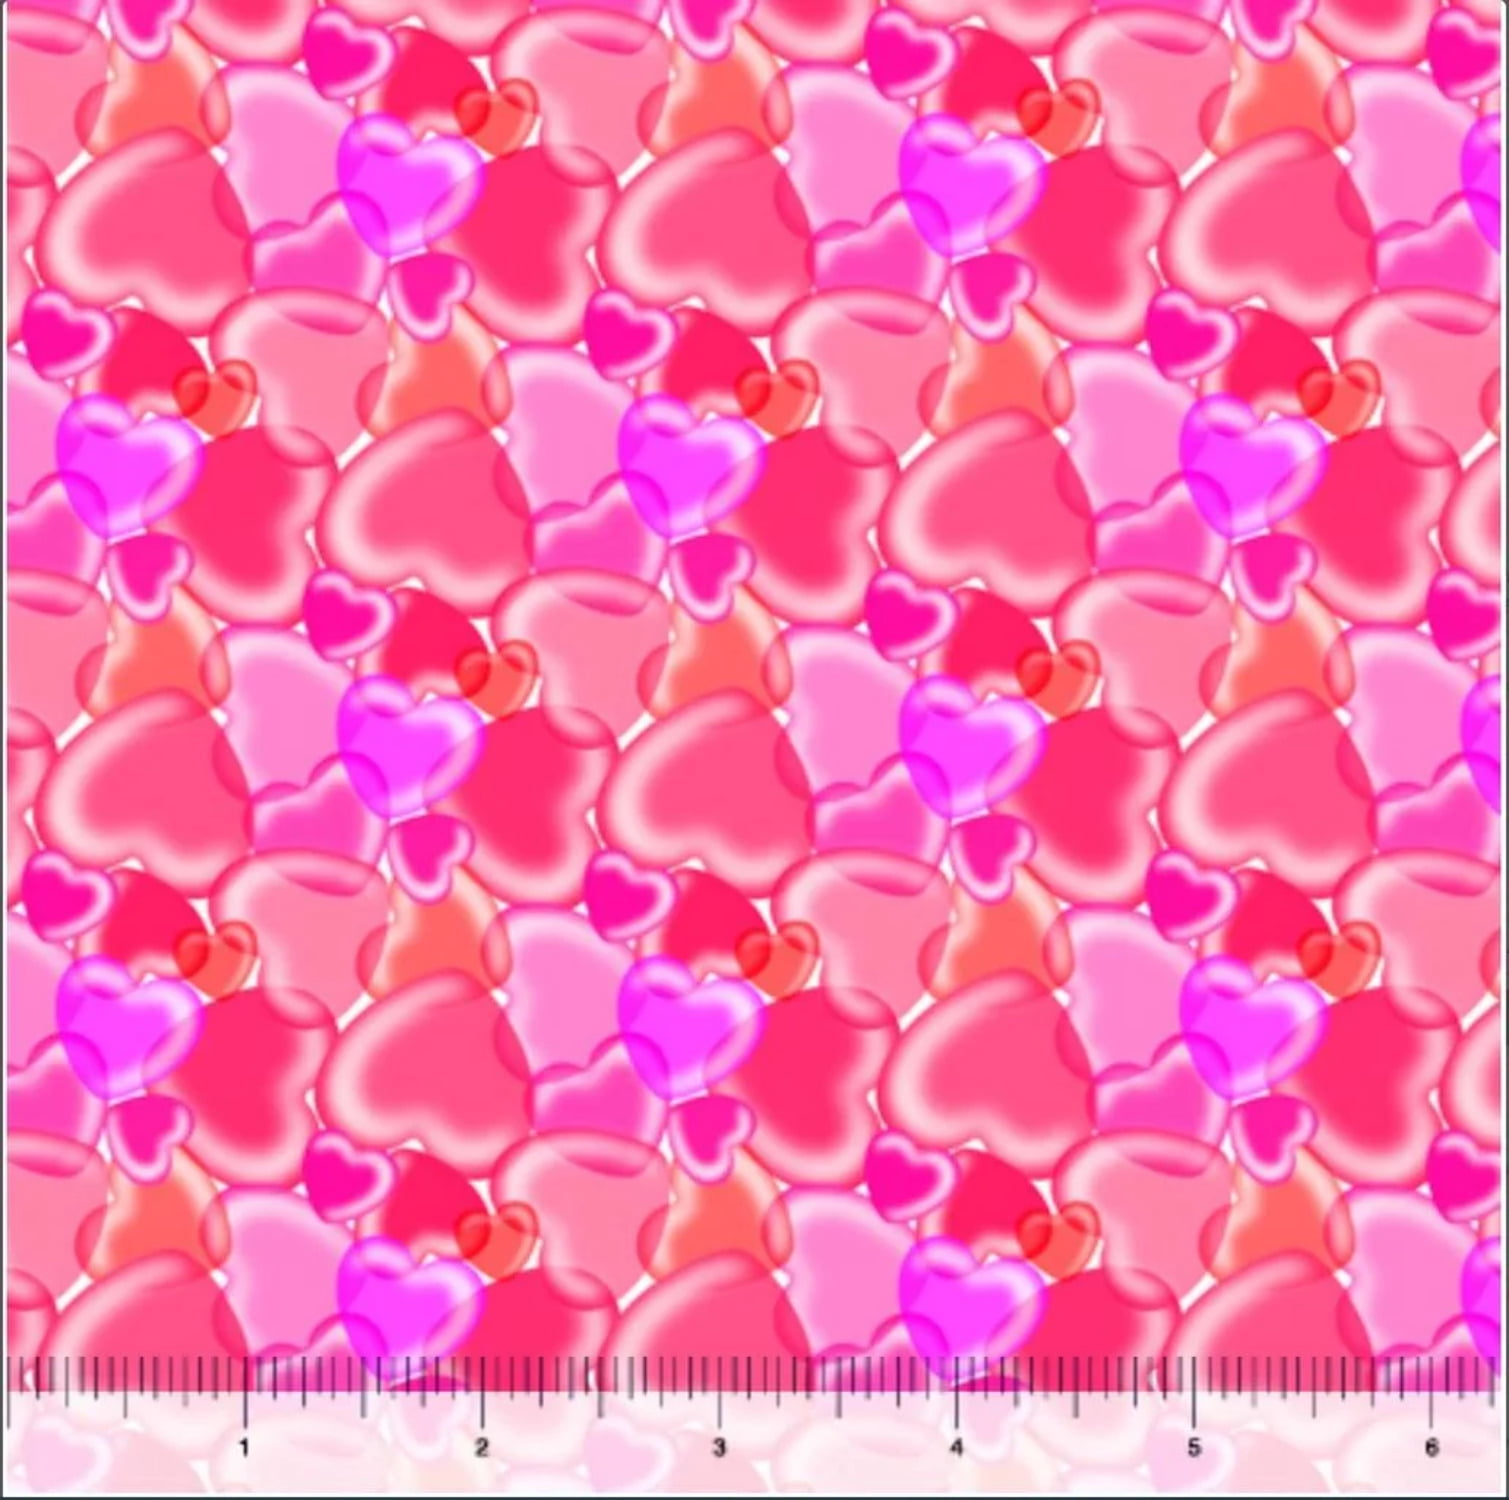 Pink Red Hearts Fabric, Wallpaper and Home Decor